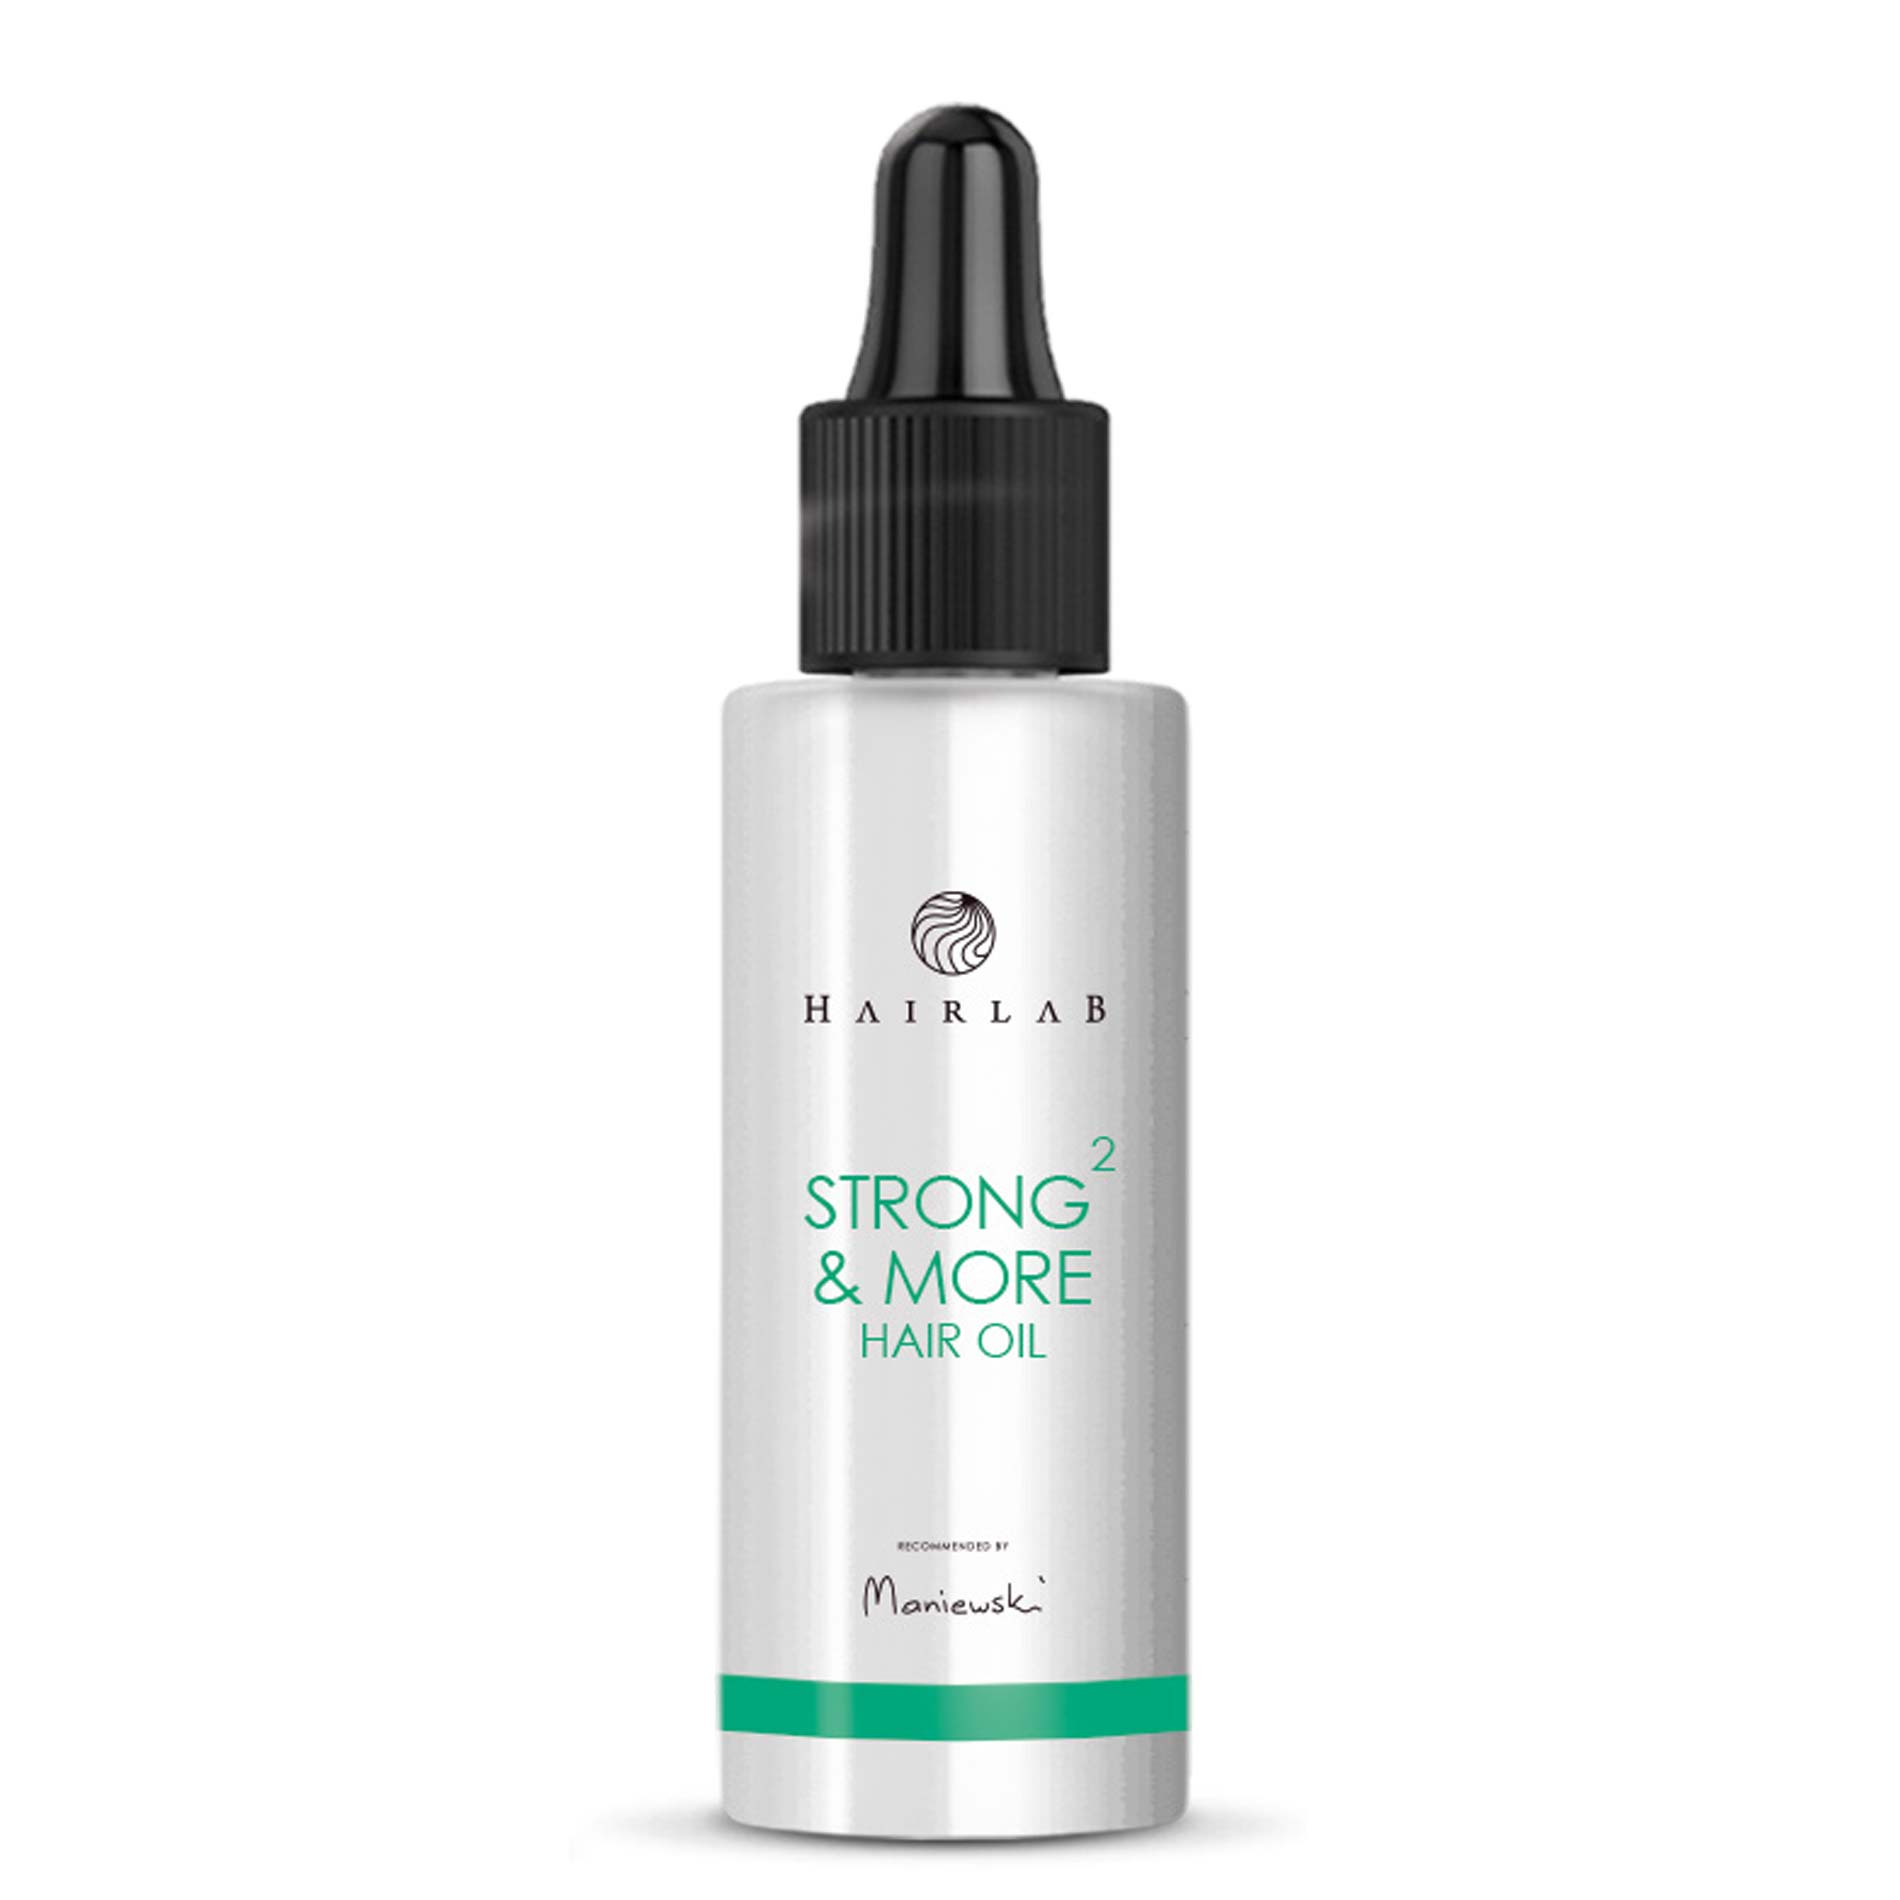 Hairlab-Strong-More-Hair-Oil